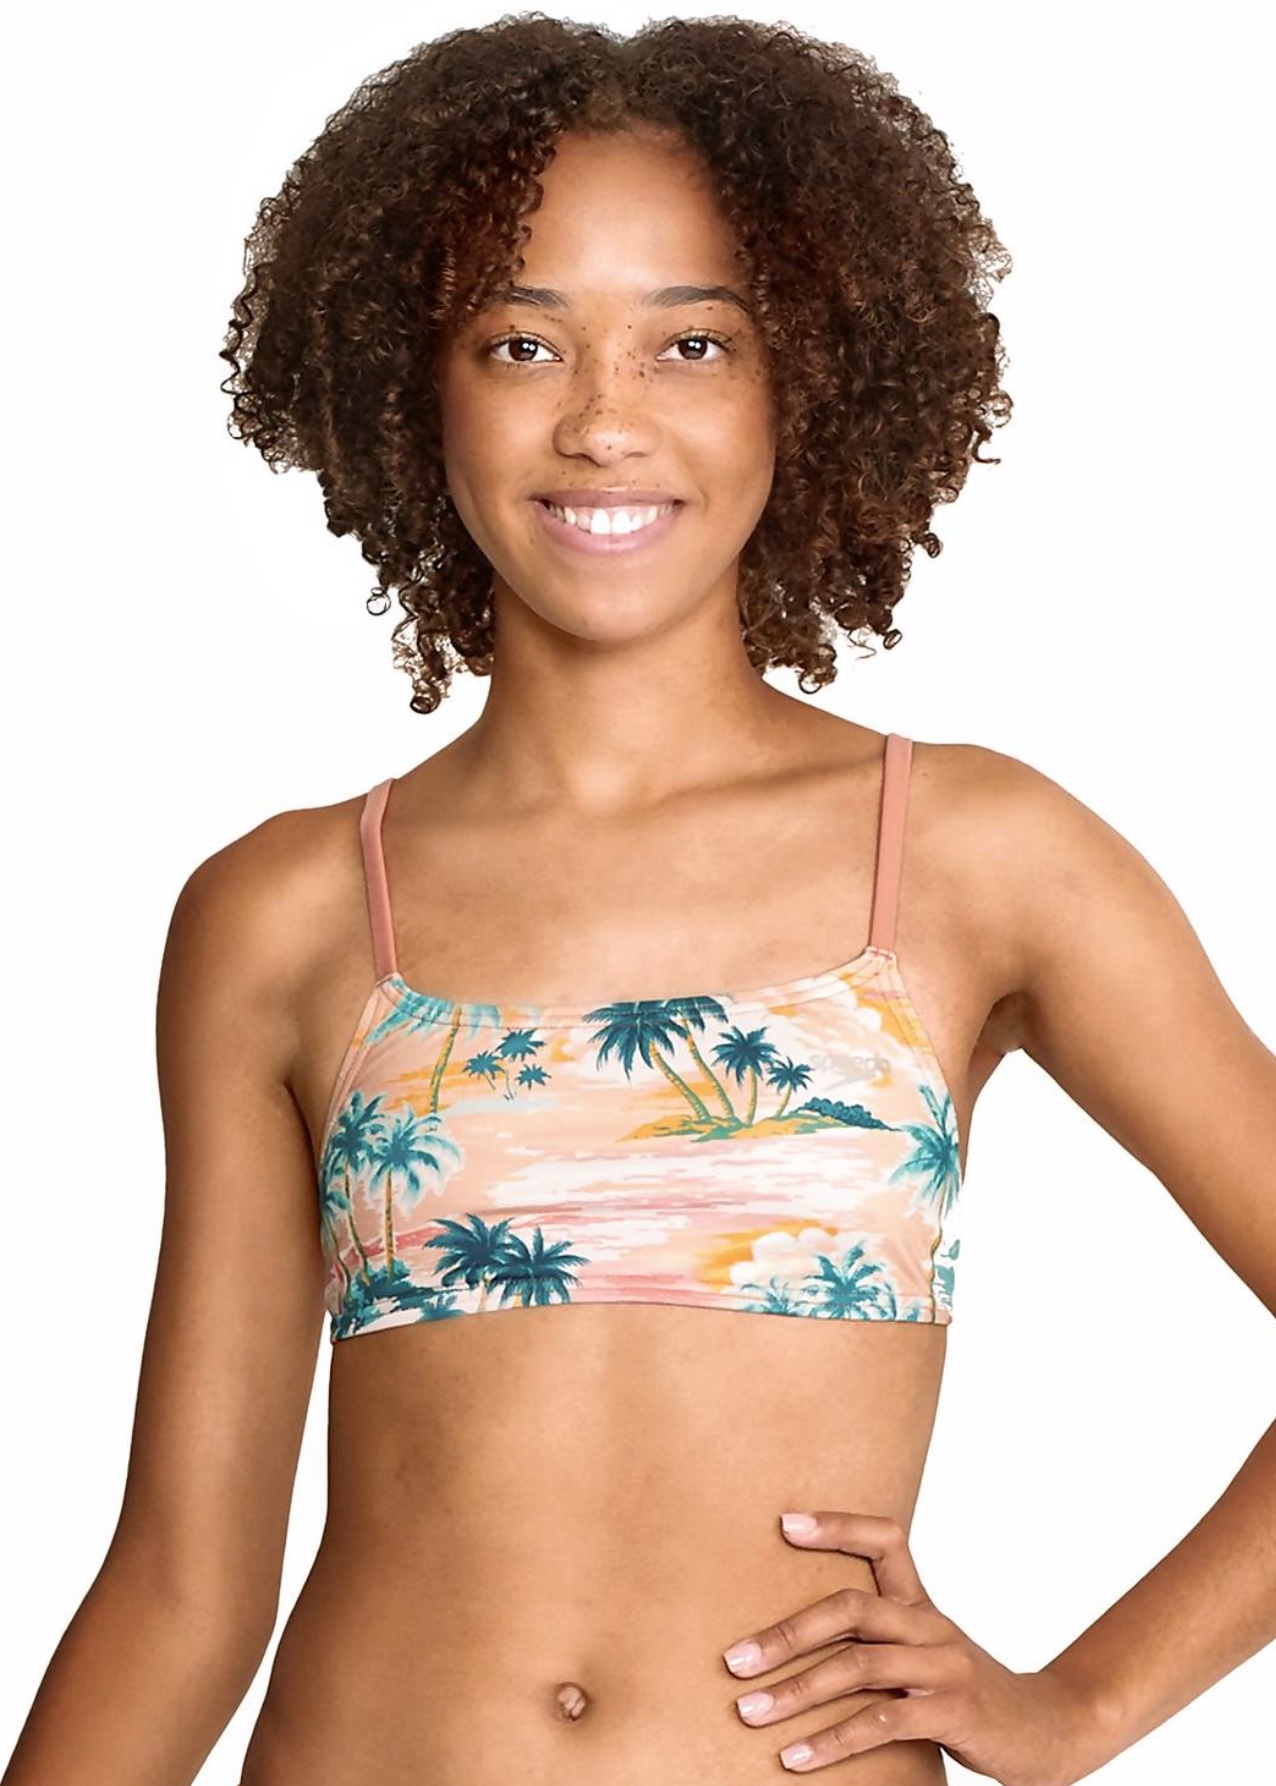 Speedo Extra 40% Off Sale: Women's Printed Strappy Bikini Top (Palm Island, Size XS, S, L) $7.18, Men's Pride Printed One Brief (Size 24 or 26) $8.38 & More  + Free Shipping